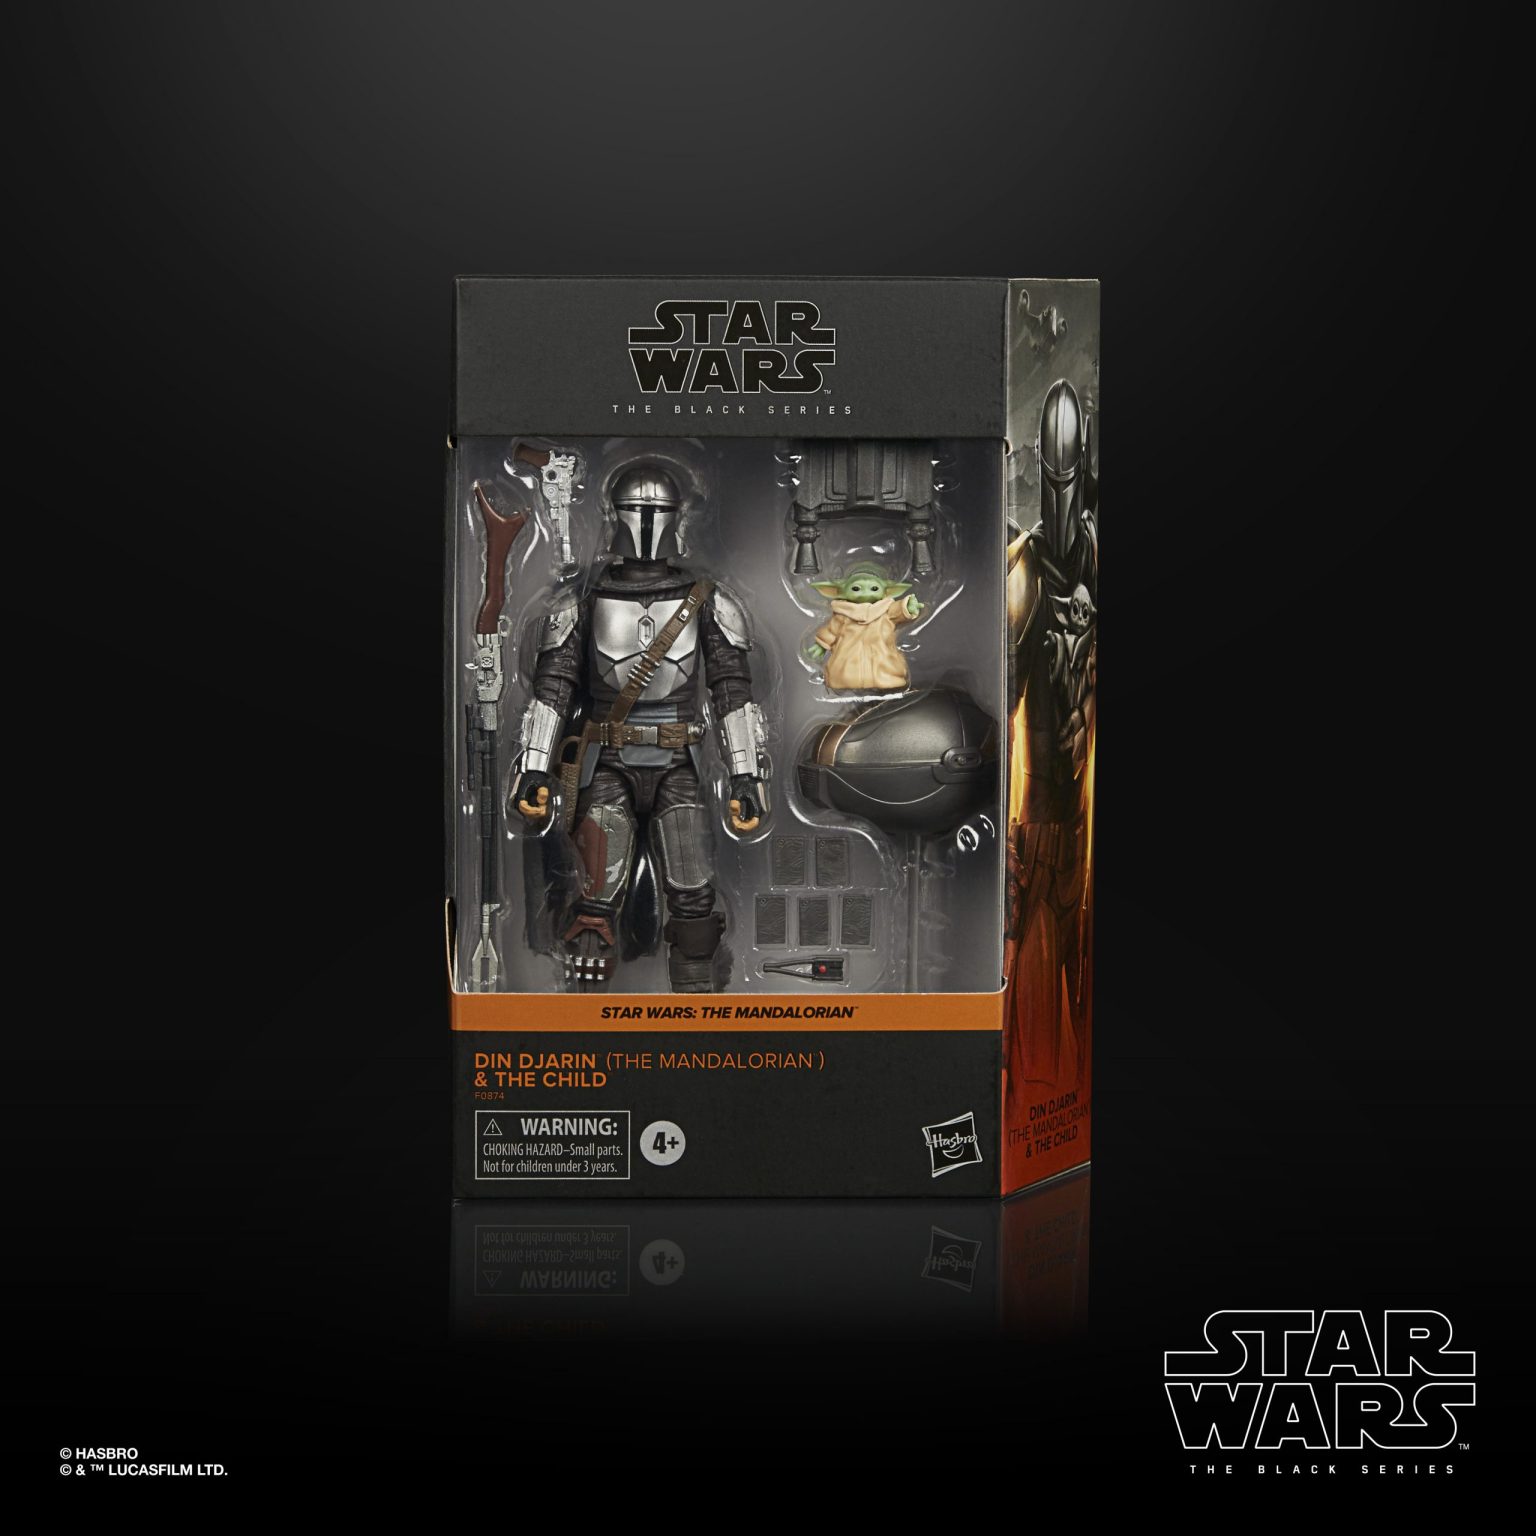 STAR-WARS-THE-BLACK-SERIES-6-INCH-DIN-DJARIN-THE-MANDALORIAN-THE-CHILD-BUILD-UP-PACK-in-pck-2-scaled.jpg